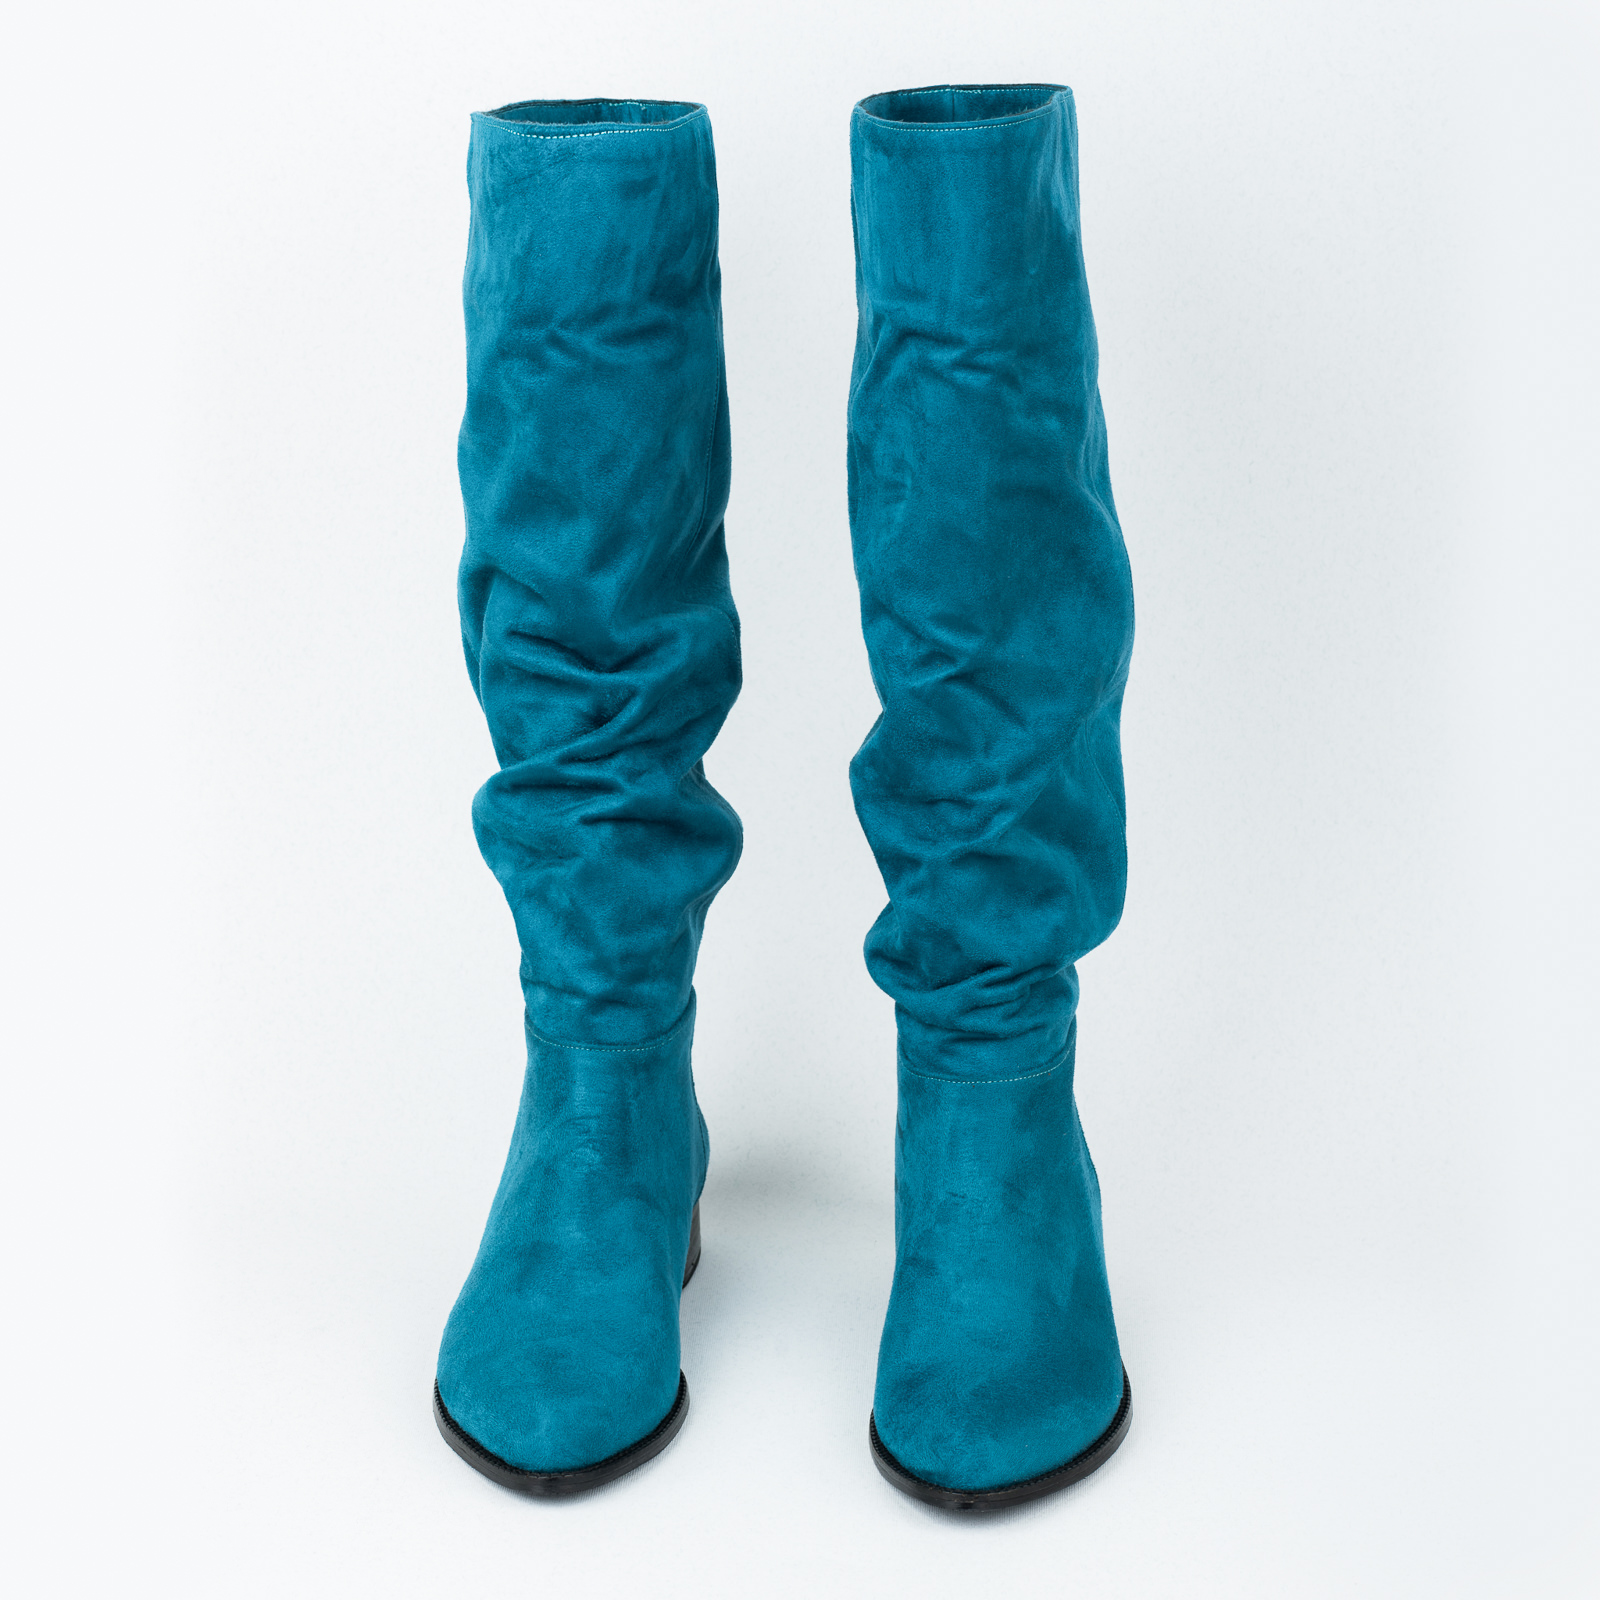 Women boots B508 - TURQUOISE